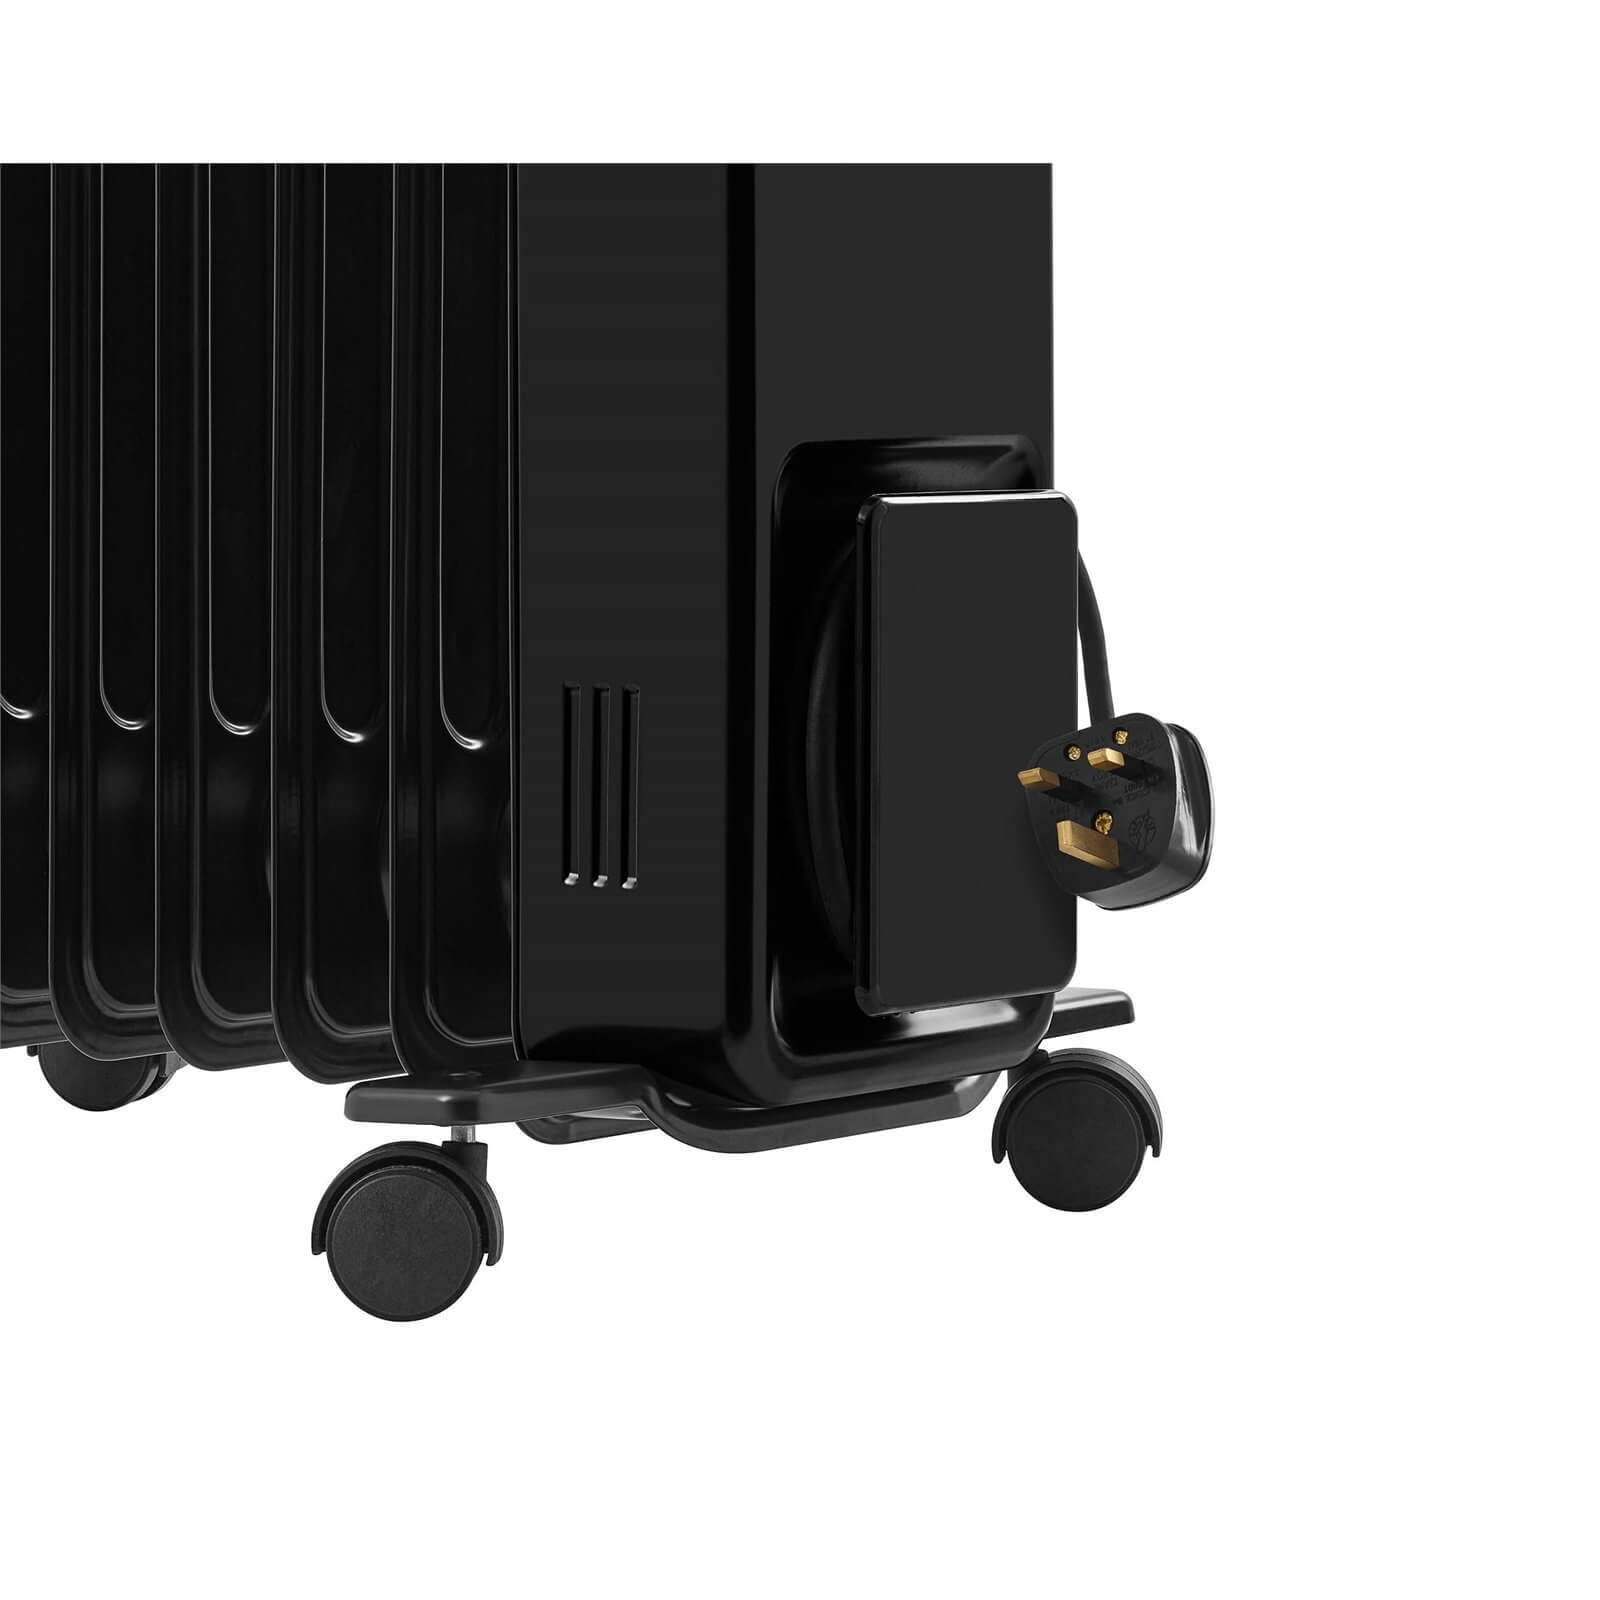 Dimplex 2kW Oil Radiator with 24 hour timer - Black